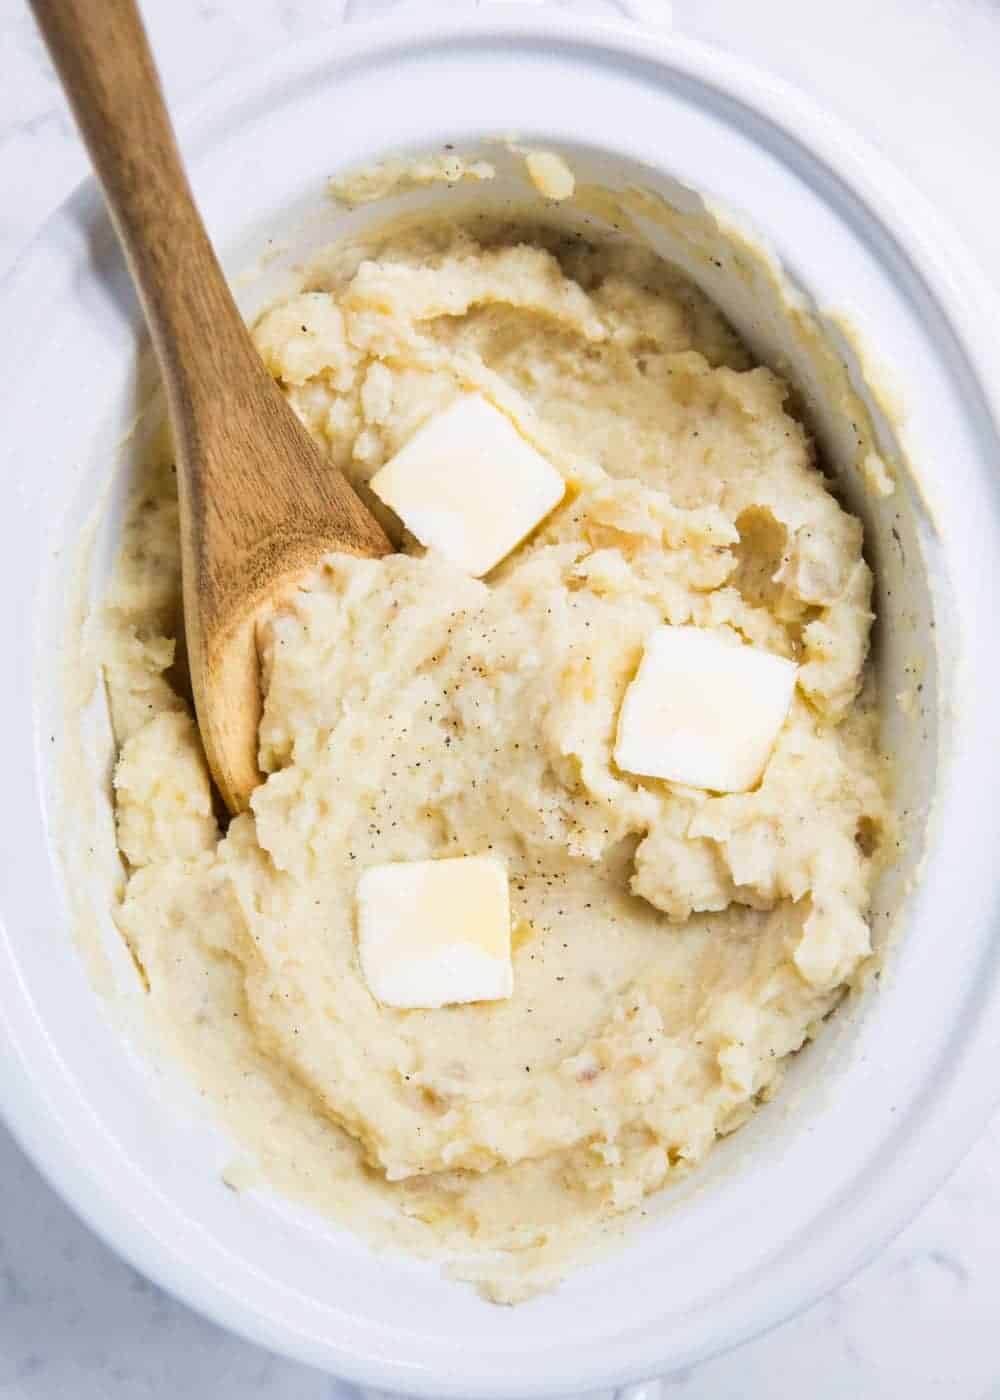 mashed potatoes in crock pot with a wooden spoon